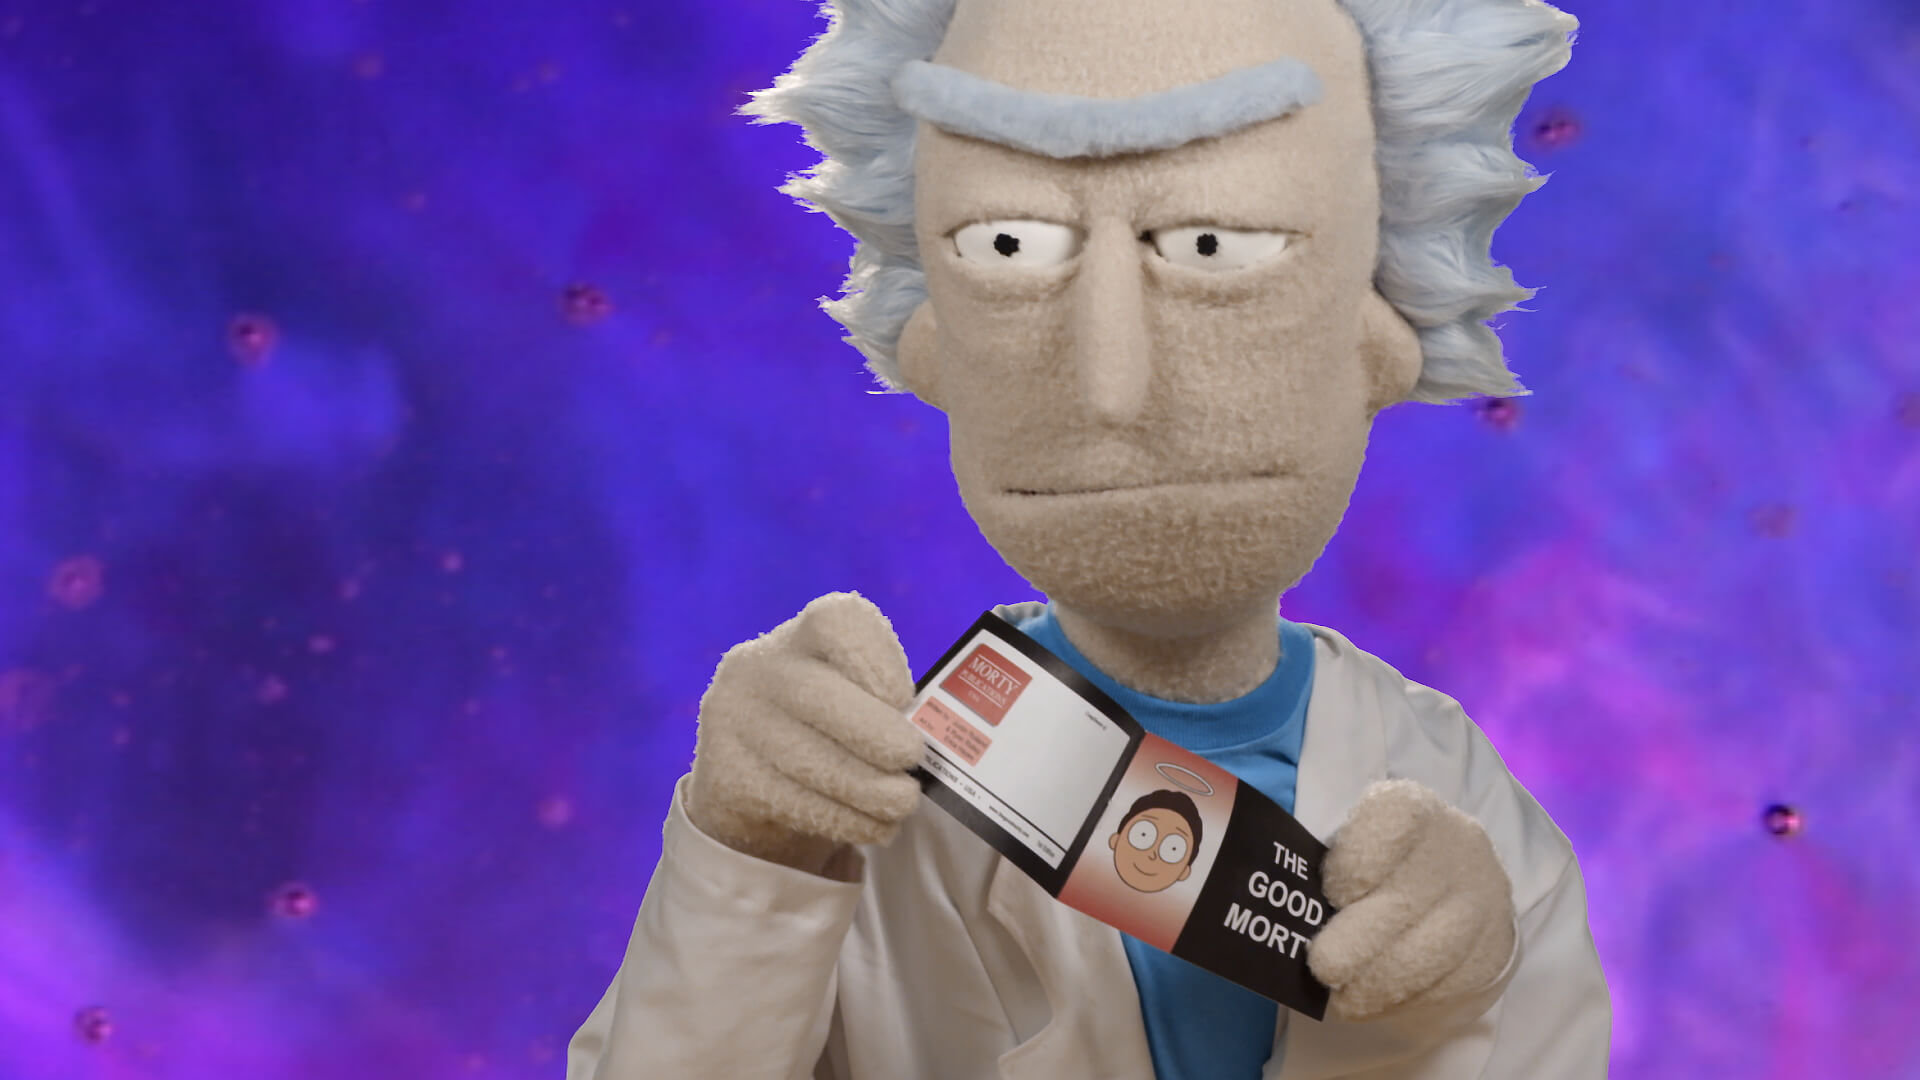 Rick Sanchez puppet from the Rick and Morty Blu-ray commercial shot and edited by Todd Bishop